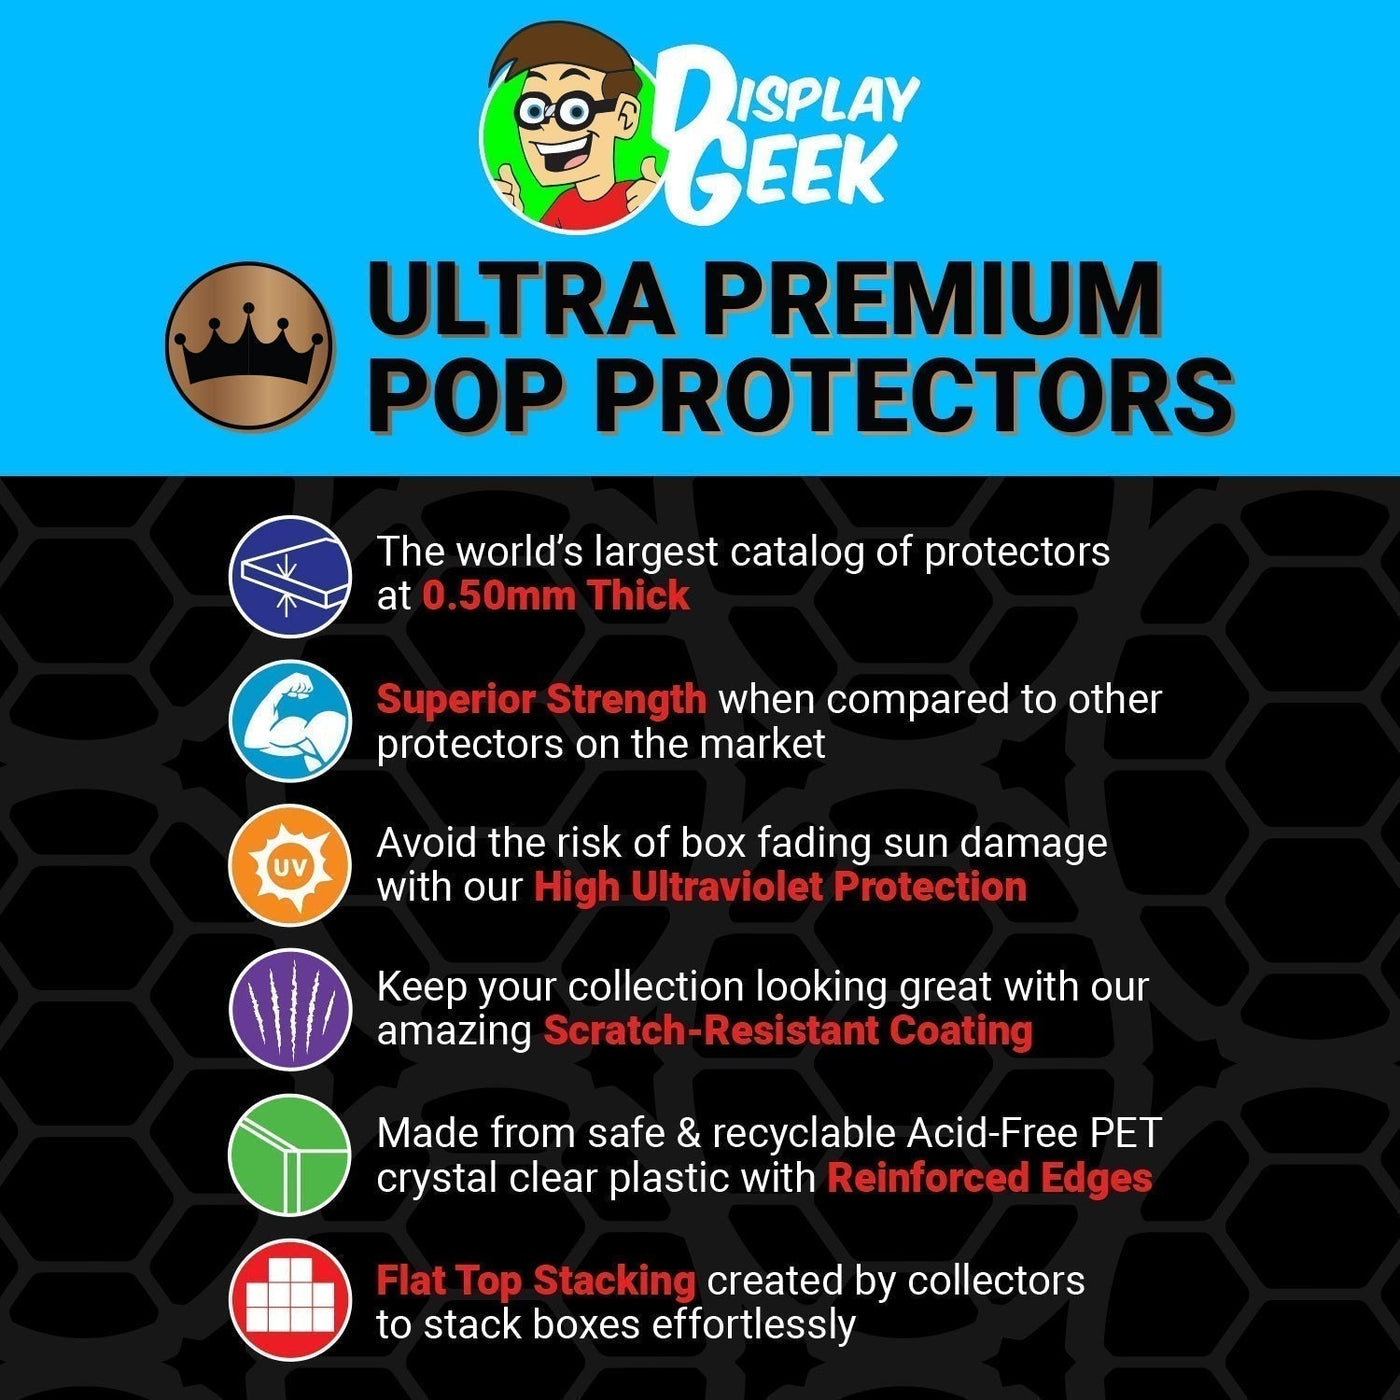 Pop Protector for Final Battle Series Green Goblin #1185 Funko Pop Deluxe on The Protector Guide App by Display Geek